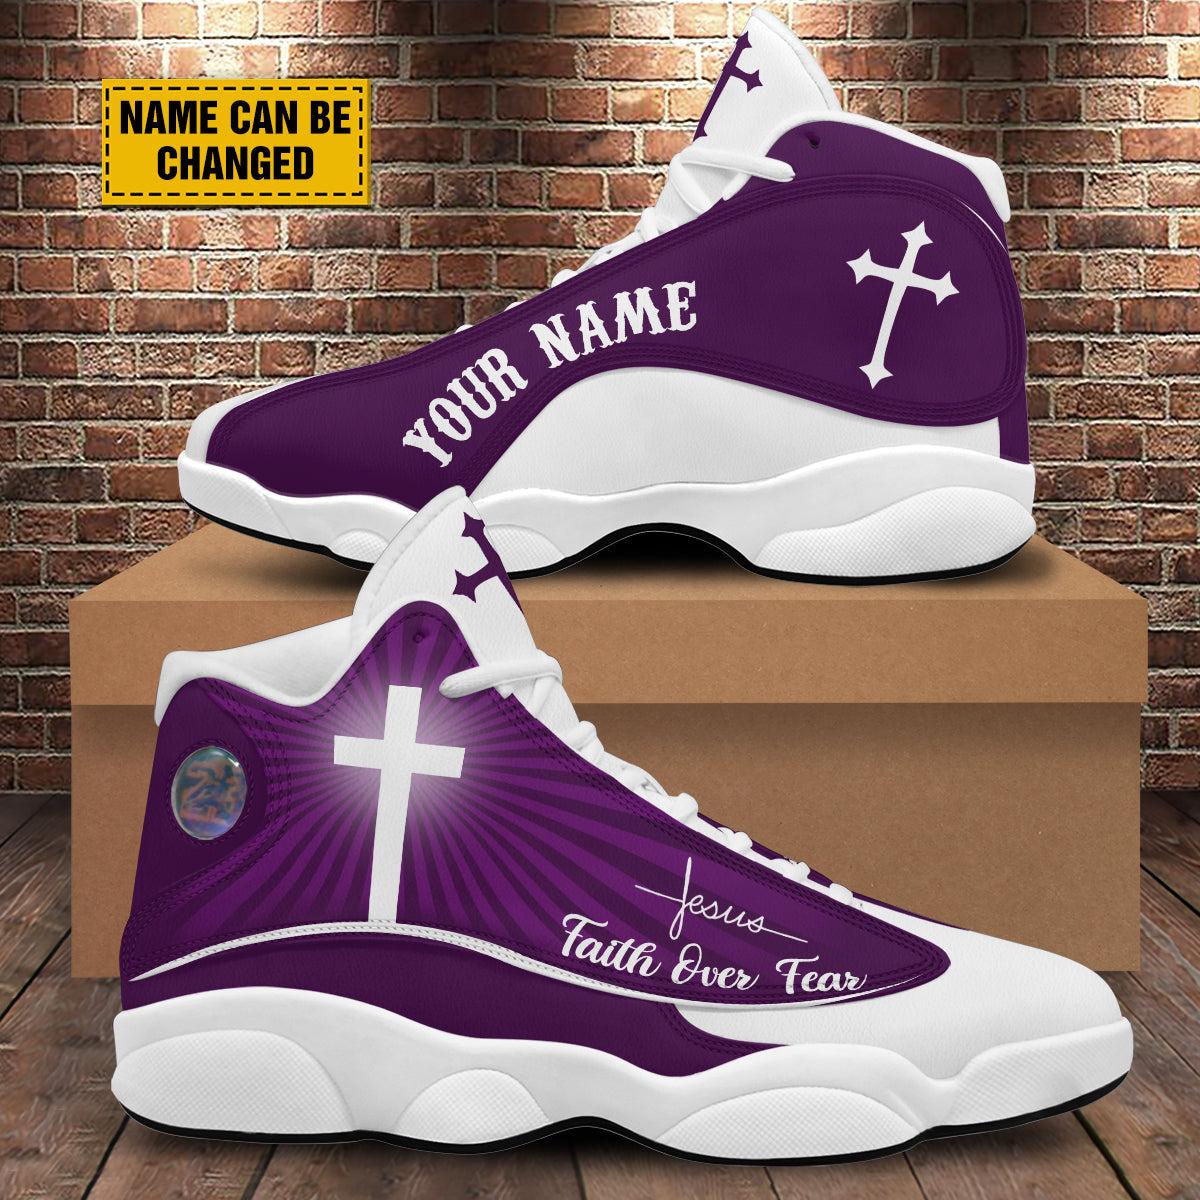 Teesdily | Jesus Faith Over Fear Basketball Shoes, Jesus Basketball Shoes Purple Design, Gift For Jesus Lovers, Christian Gifts Unisex Basketball Shoes With Thick Soles